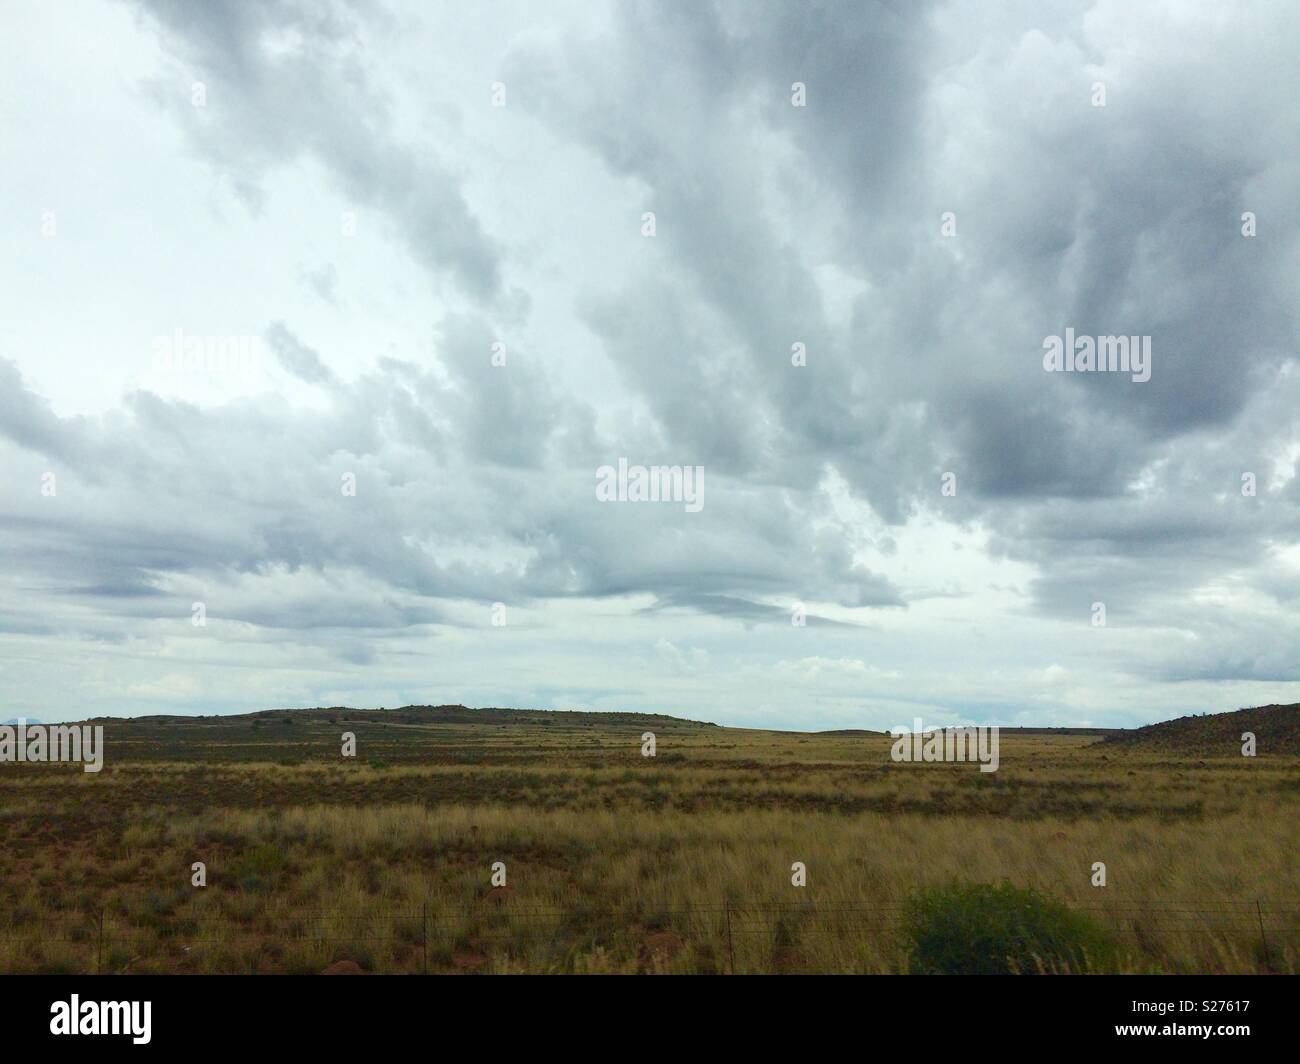 Landscape view of semi arid Karoo vegetation against backdrop of moody sky with grey clouds on Autumn day in South Africa Stock Photo